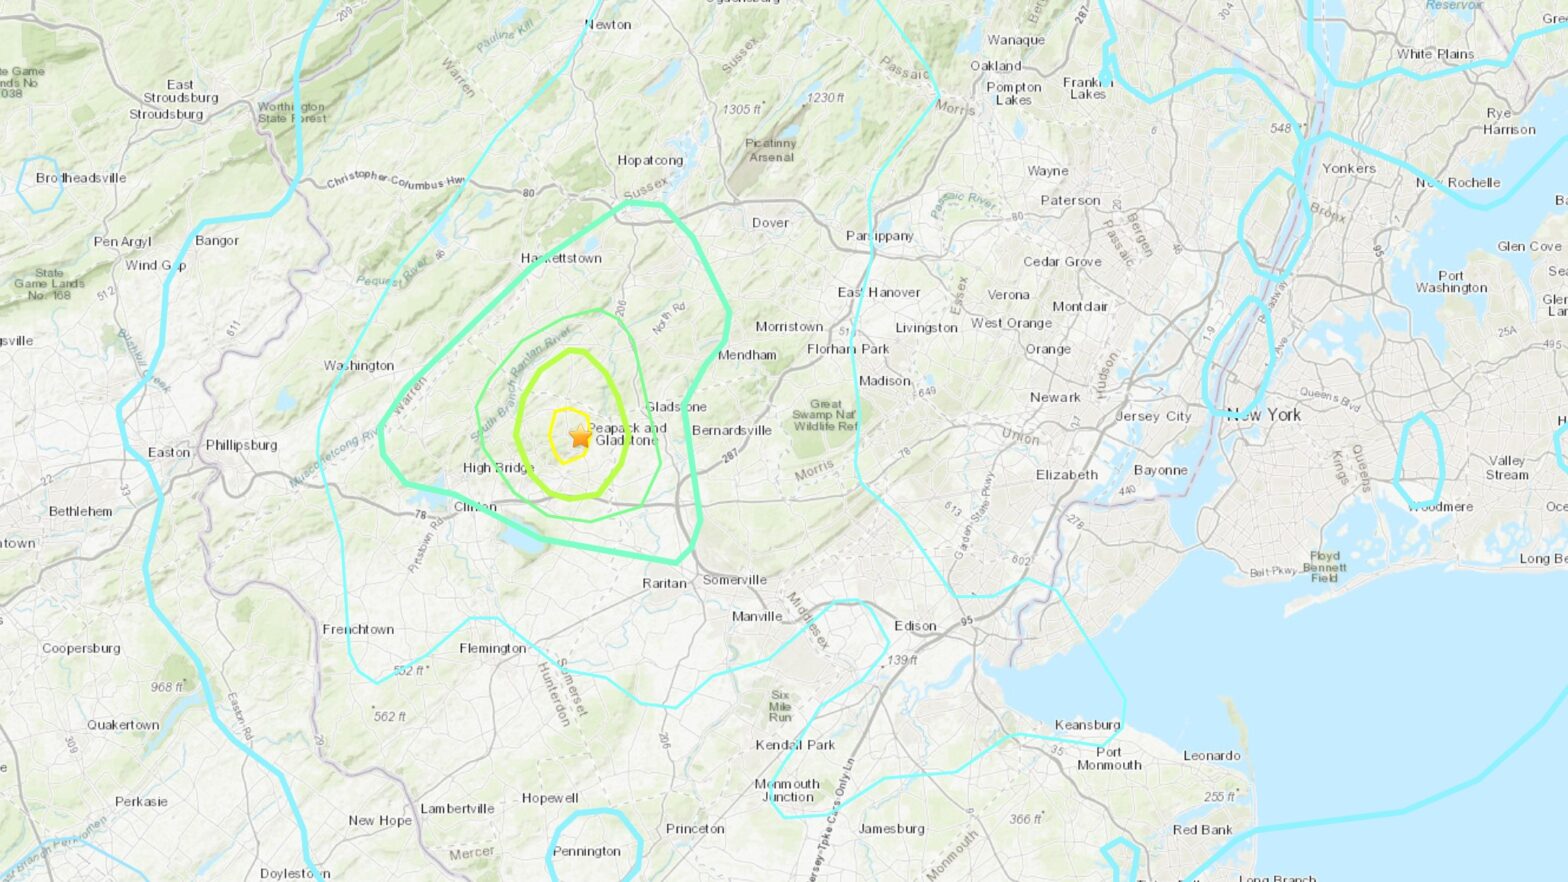 Map of the epicenter of the earthquake in New Jersey and the range of the tremors stretching into New York City.